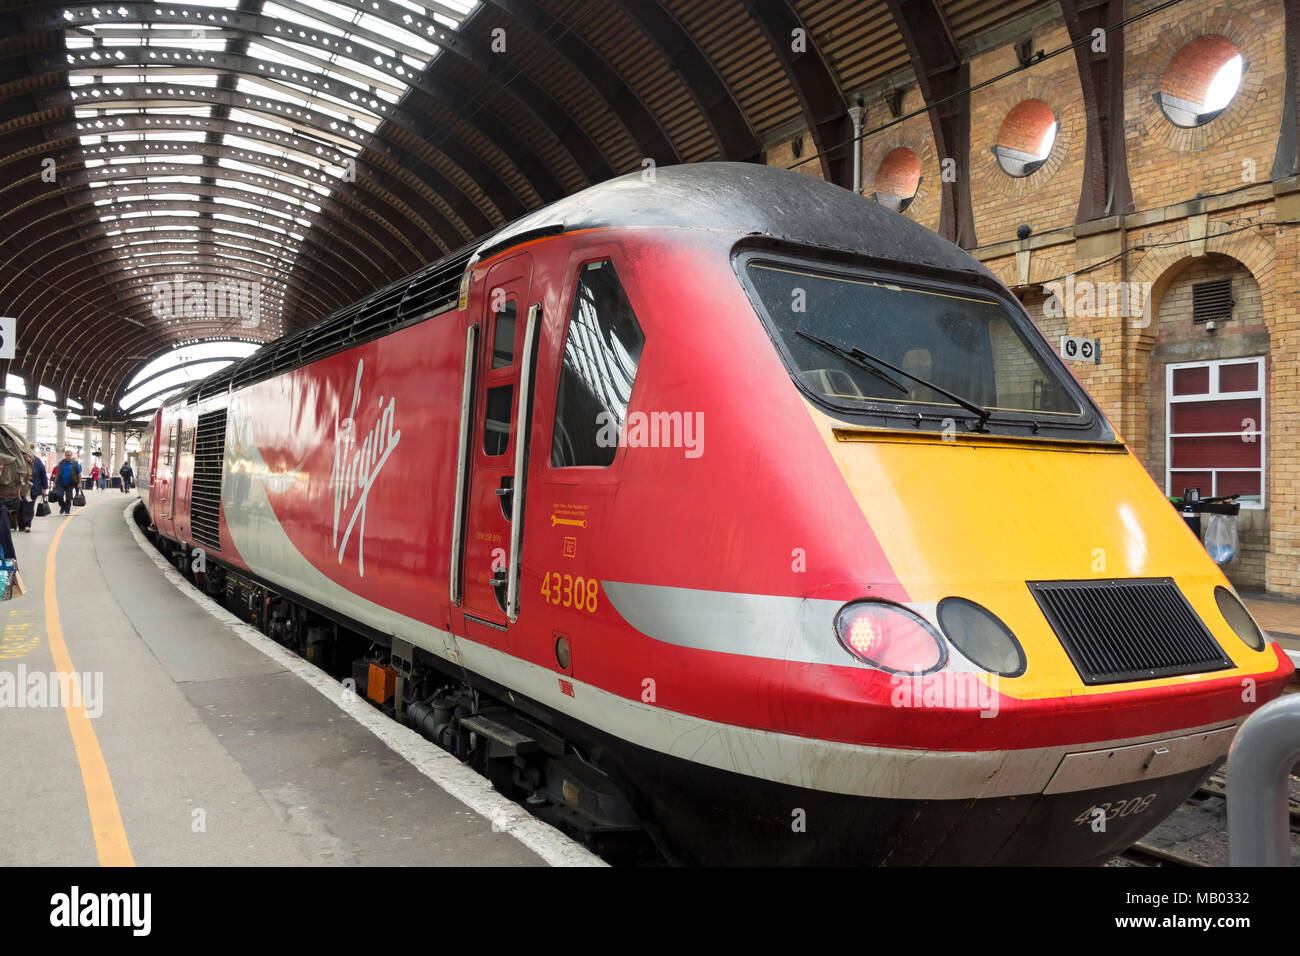 Virgin Trains high speed passenger train waiting at the station. Stock Photo